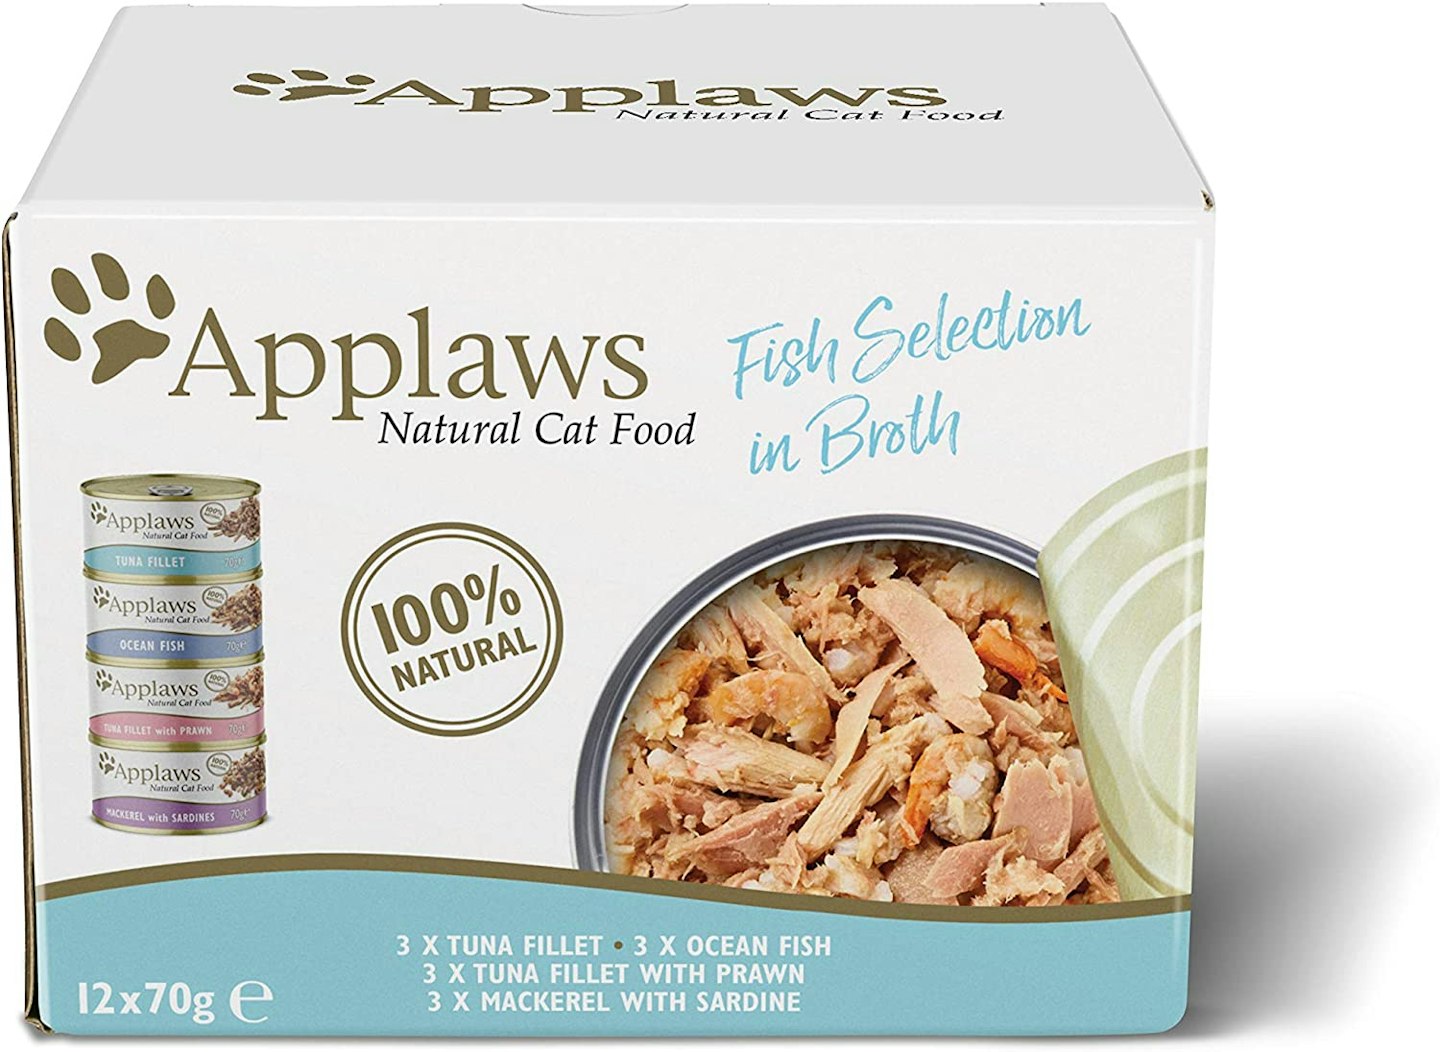 Applaws wet cat food fish selection